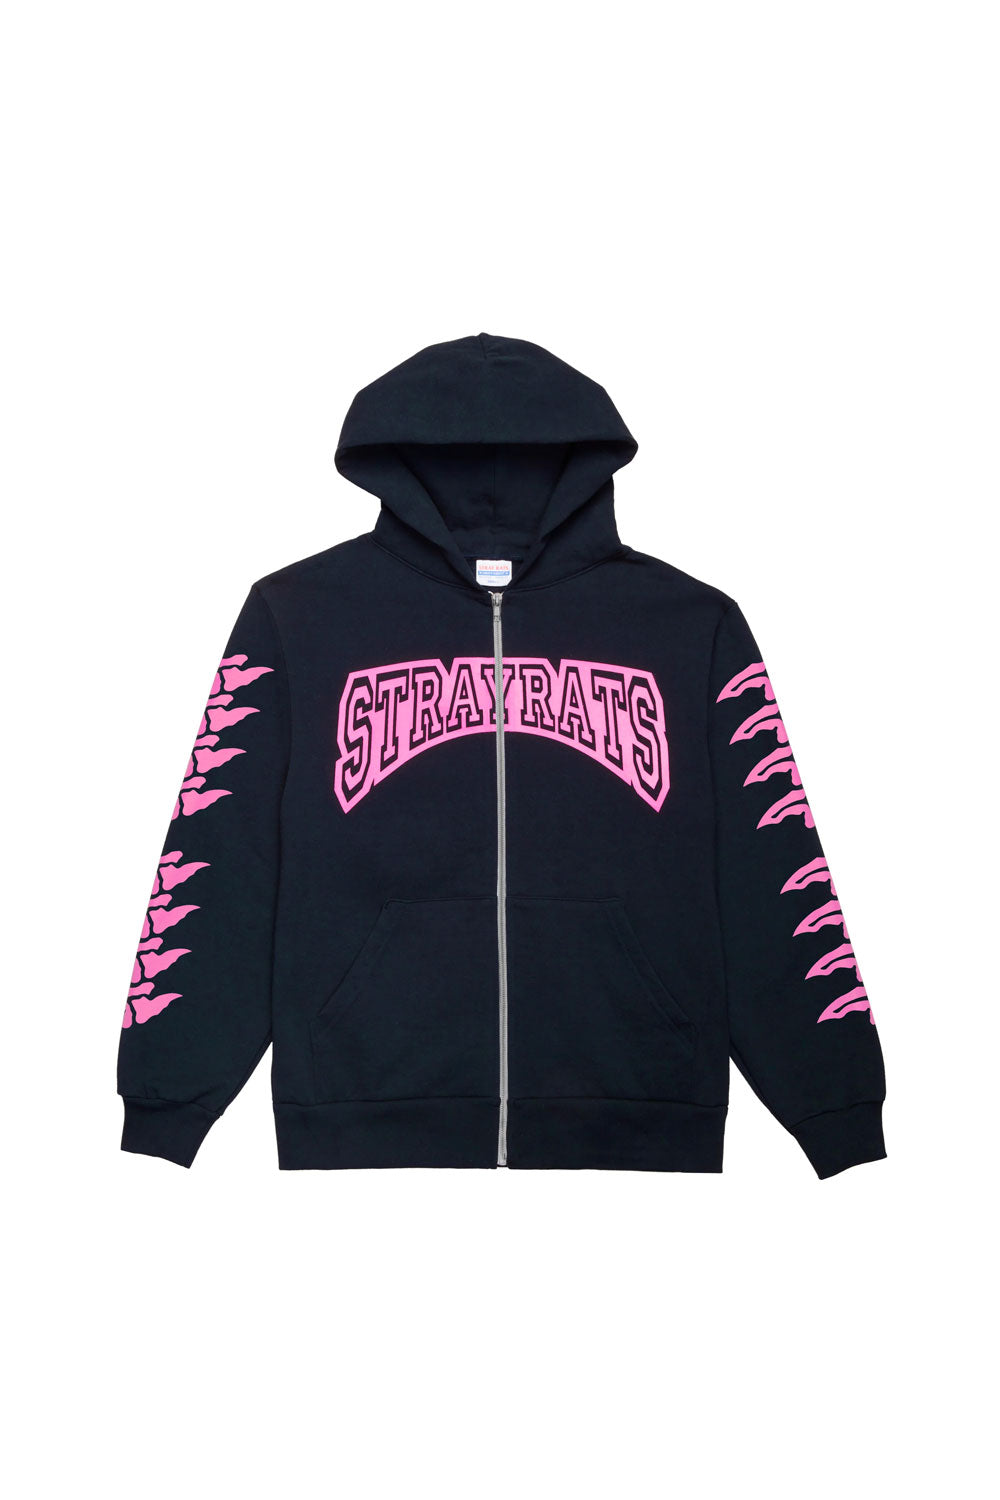 The STRAY RATS -  EXO ZIP UP HOODIE BLUE available online with global shipping, and in PAM Stores Melbourne and Sydney.